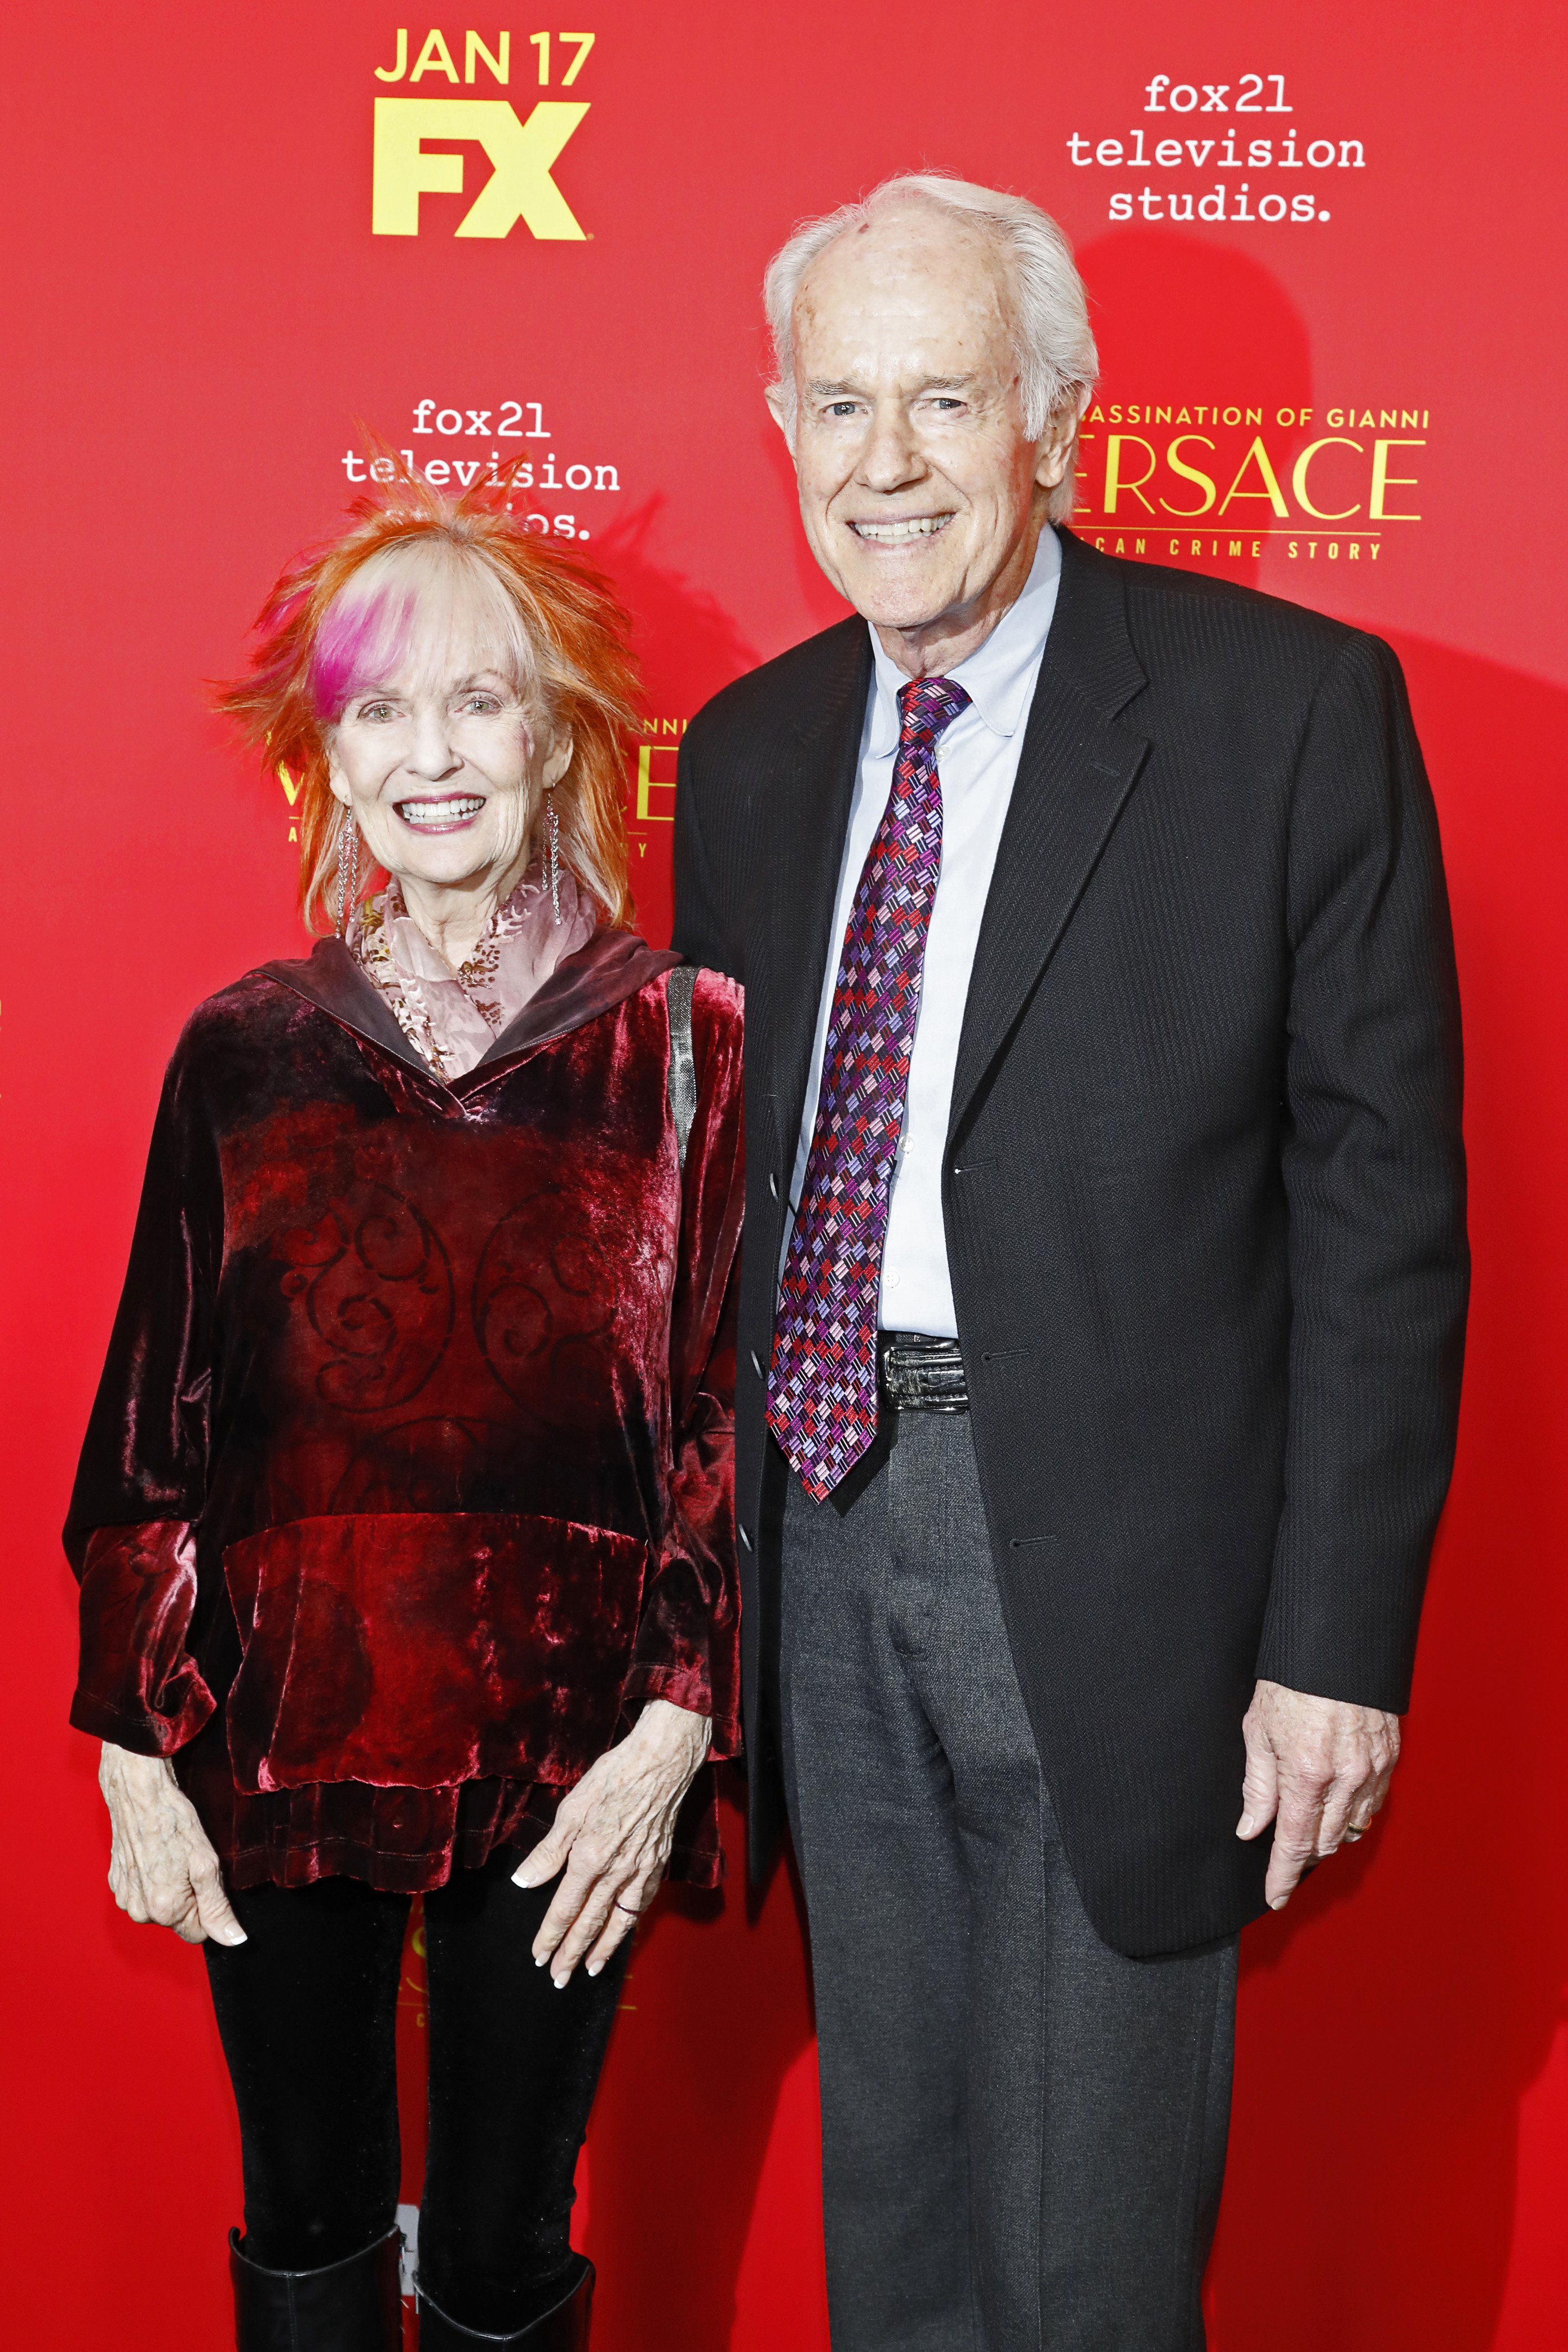 Actress Shelley Fabares and her husband Mike Farrell attend the premiere of "The Assassination Of Gianni Versace: American Crime Story" at ArcLight Hollywood on January 8, 2018 in Hollywood, California ┃Source: Getty Images